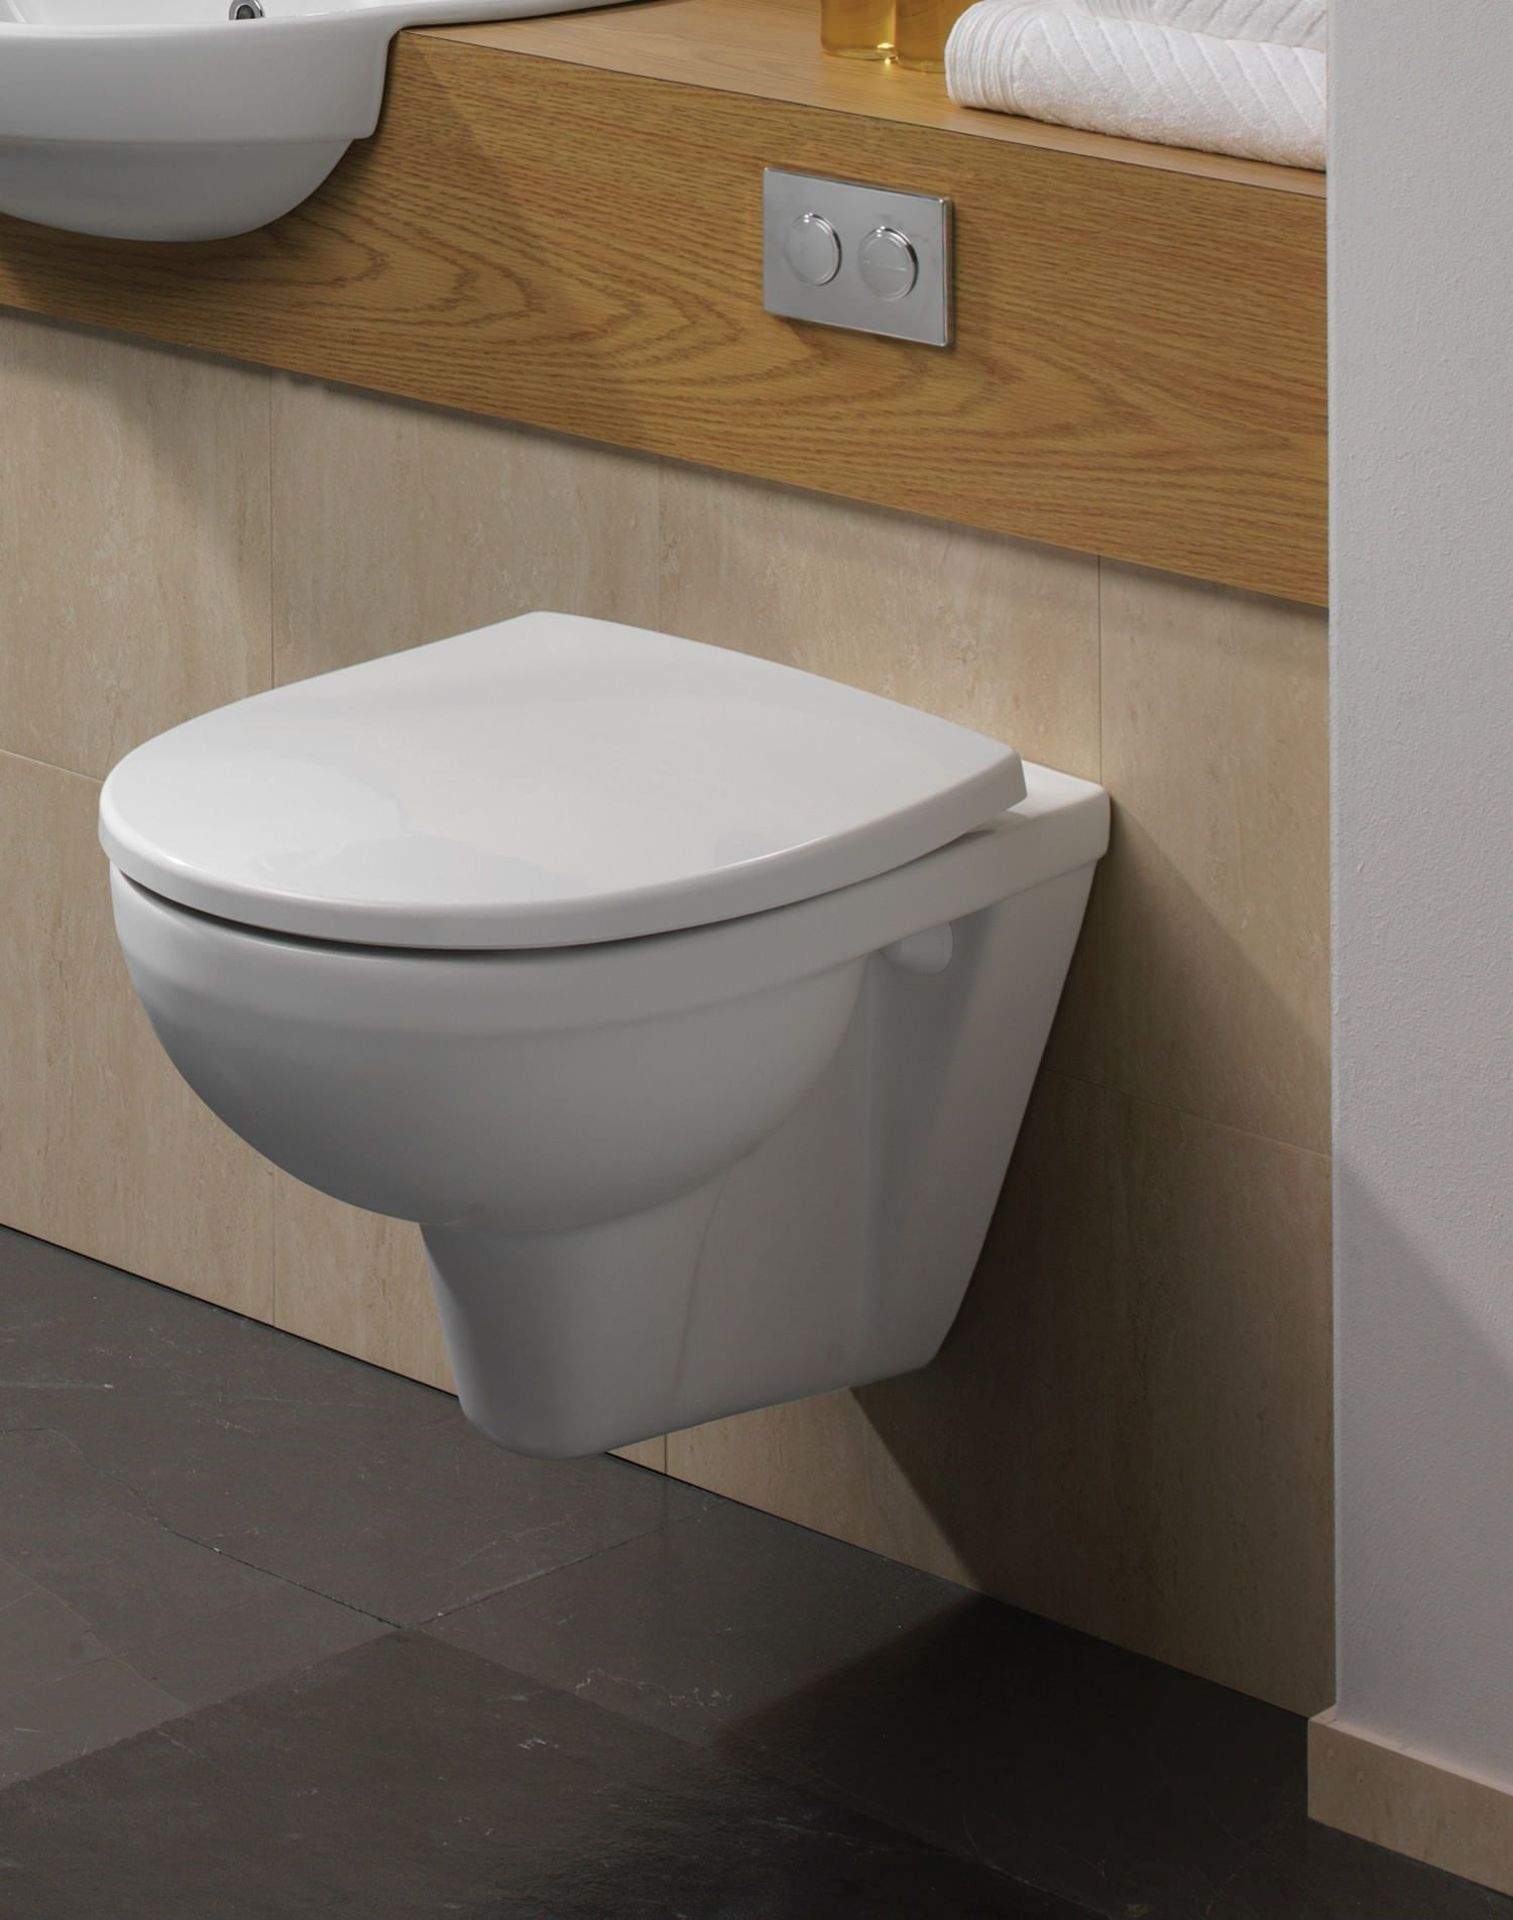 Brand New Twyford White Refresh Back to Wall Toilet, Floor Mounted Refresh Back to Wall Toilet.Seat